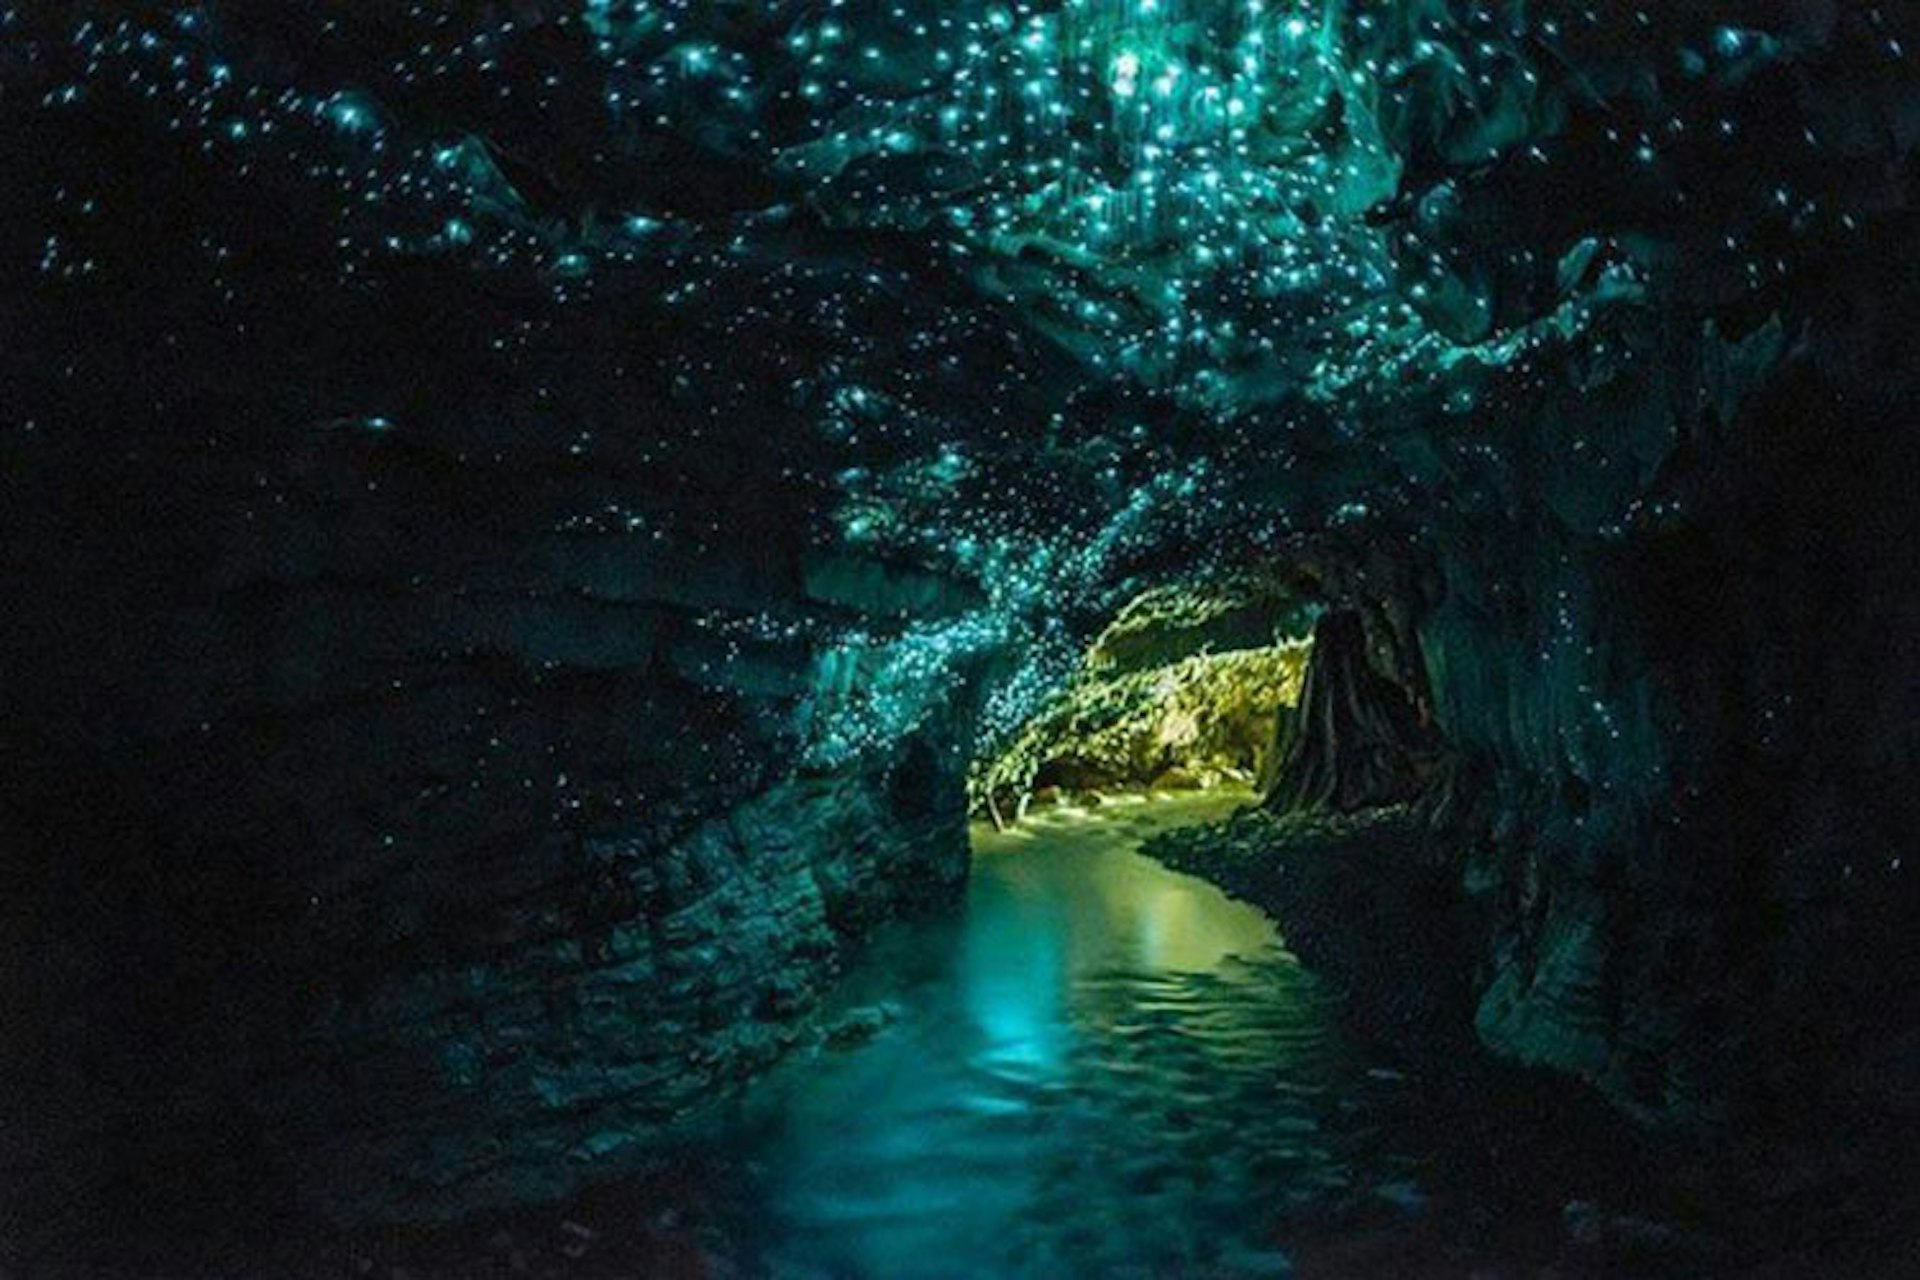 Step into a fairytale in New Zealand's glowworm-spangled Waitomo Caves. Image by 2il org / CC BY 2.0